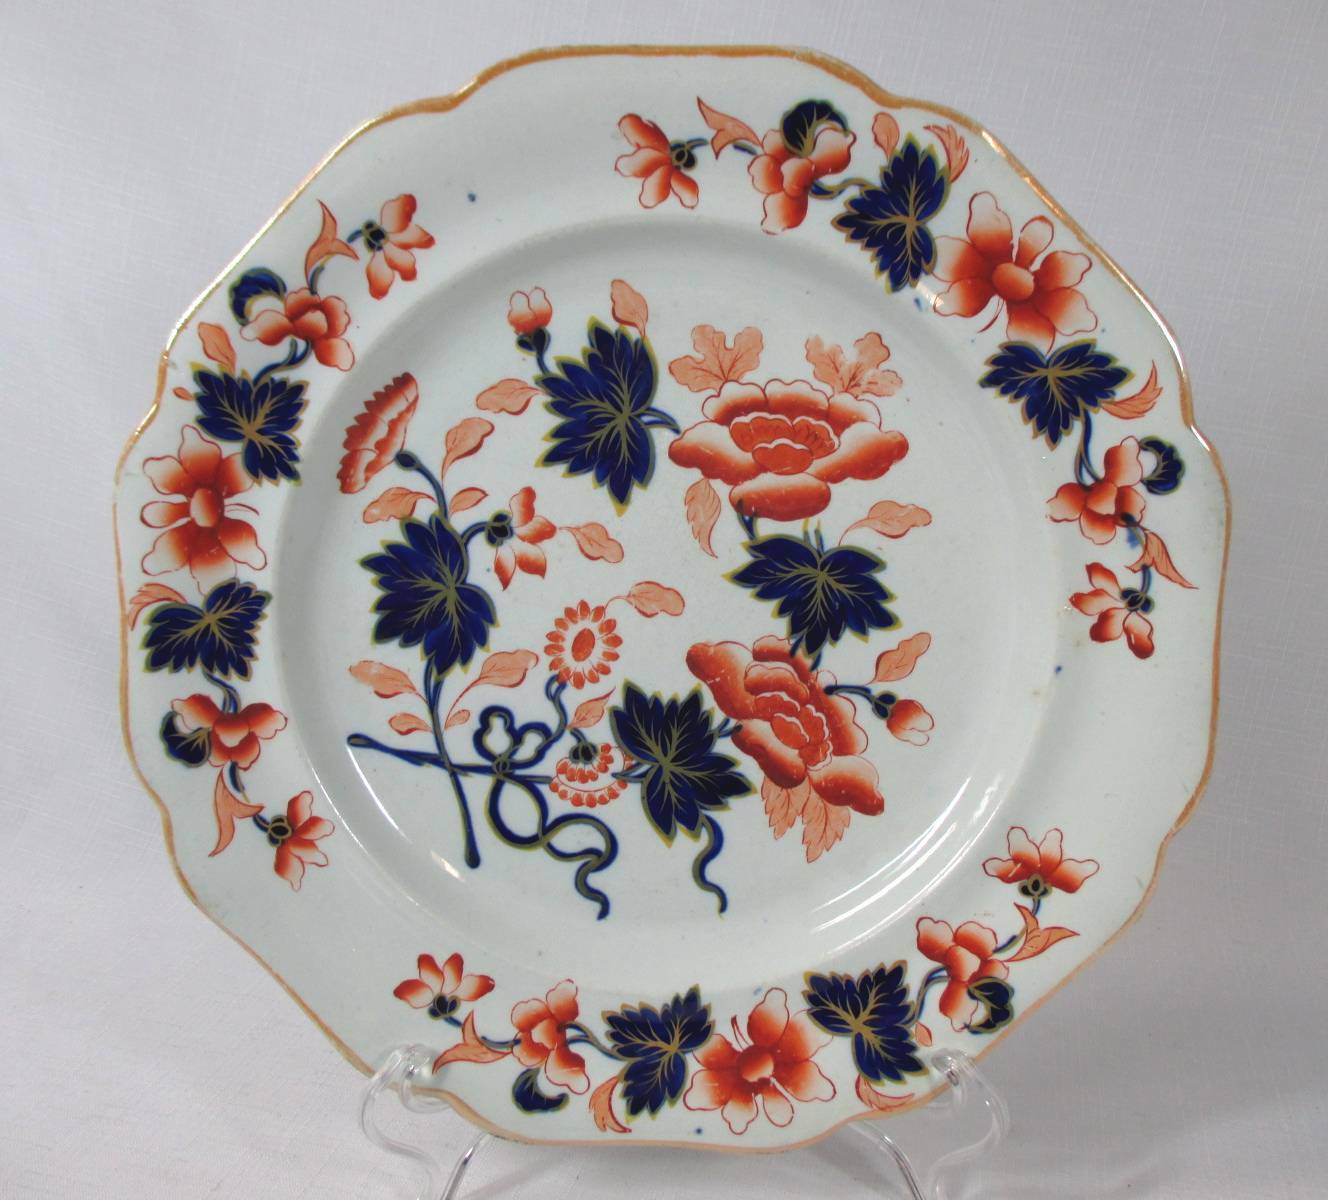 ANTIQUE STAFFORDSHIRE STONE CHINA COBALT BLUE & CHINESE RED PLATE CA 1830